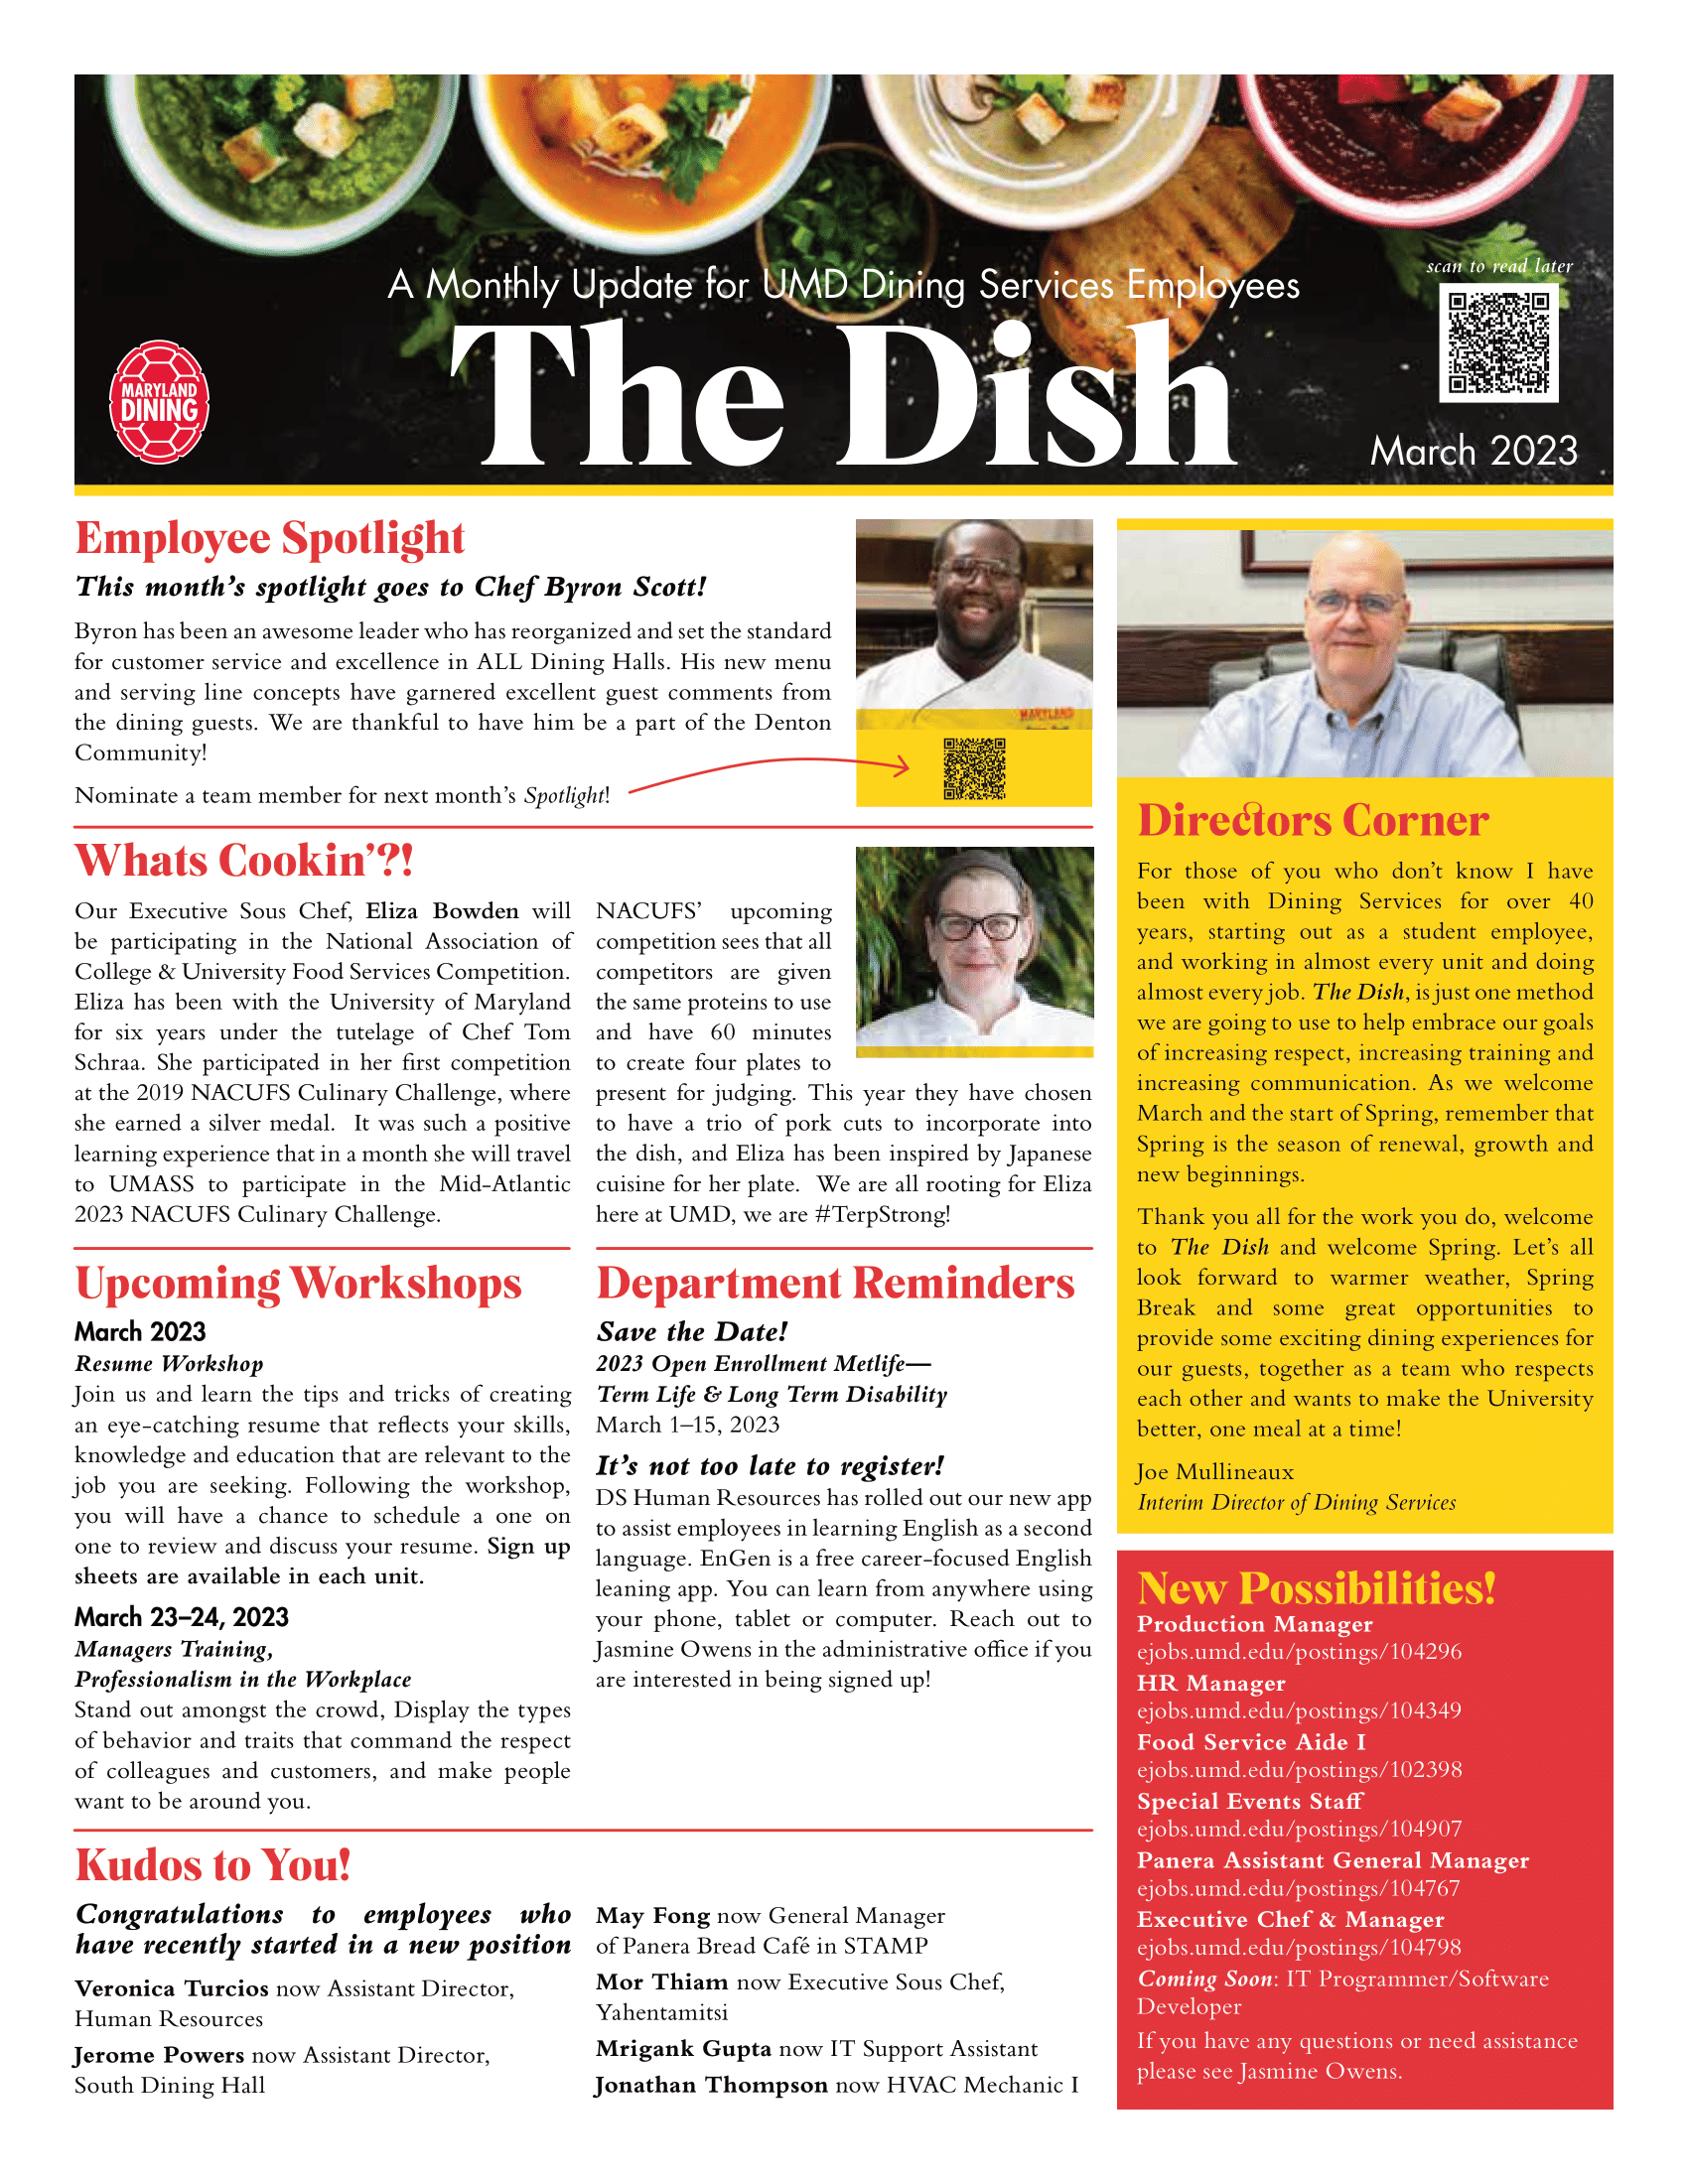 The Dish March 2023